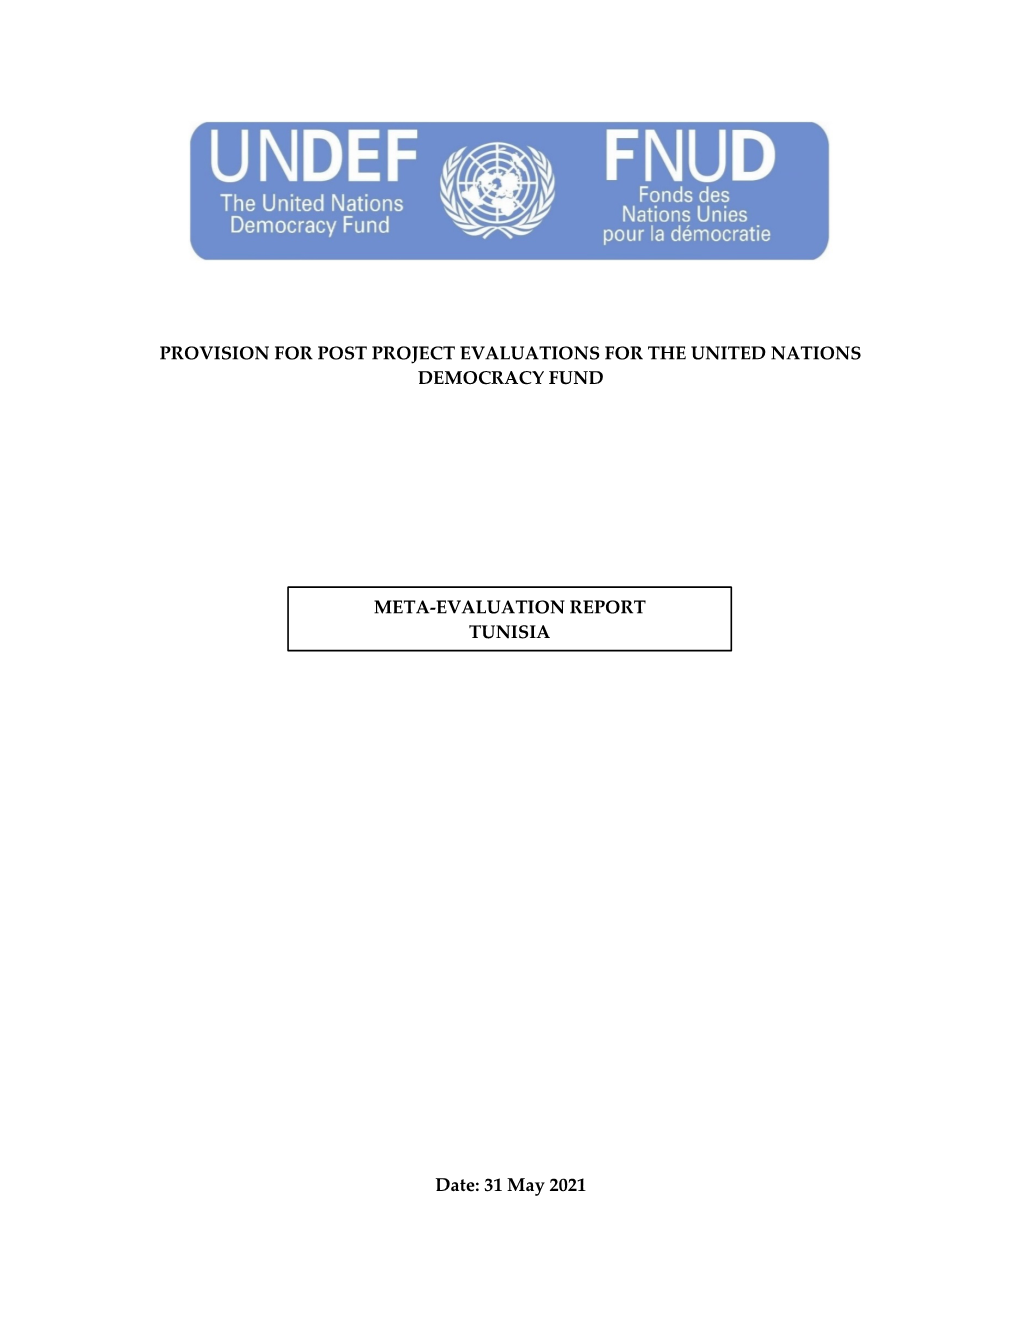 Tunisia (PDF): Meta-Evaluation of UNDEF-Funded Projects Implemented Between 2013 and 2021PDF